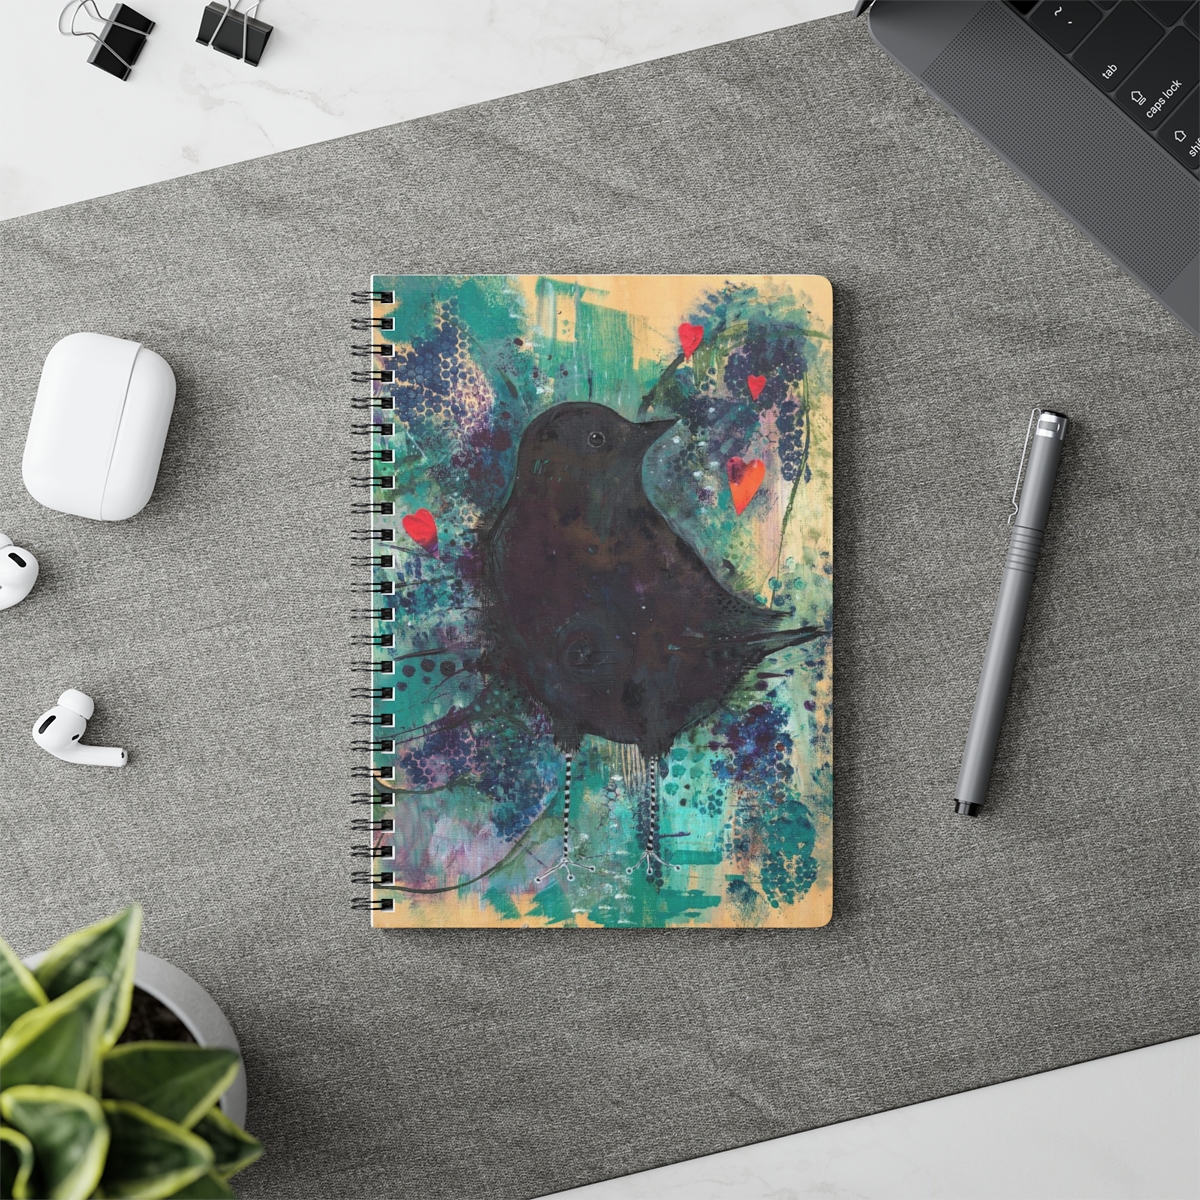 Special crow notebook - this picture shows the crow notebook in context next to a pencil. The image on the notebook is a crow emerging from turquoise and purple toned and textured background. 3 red hearts float above him.